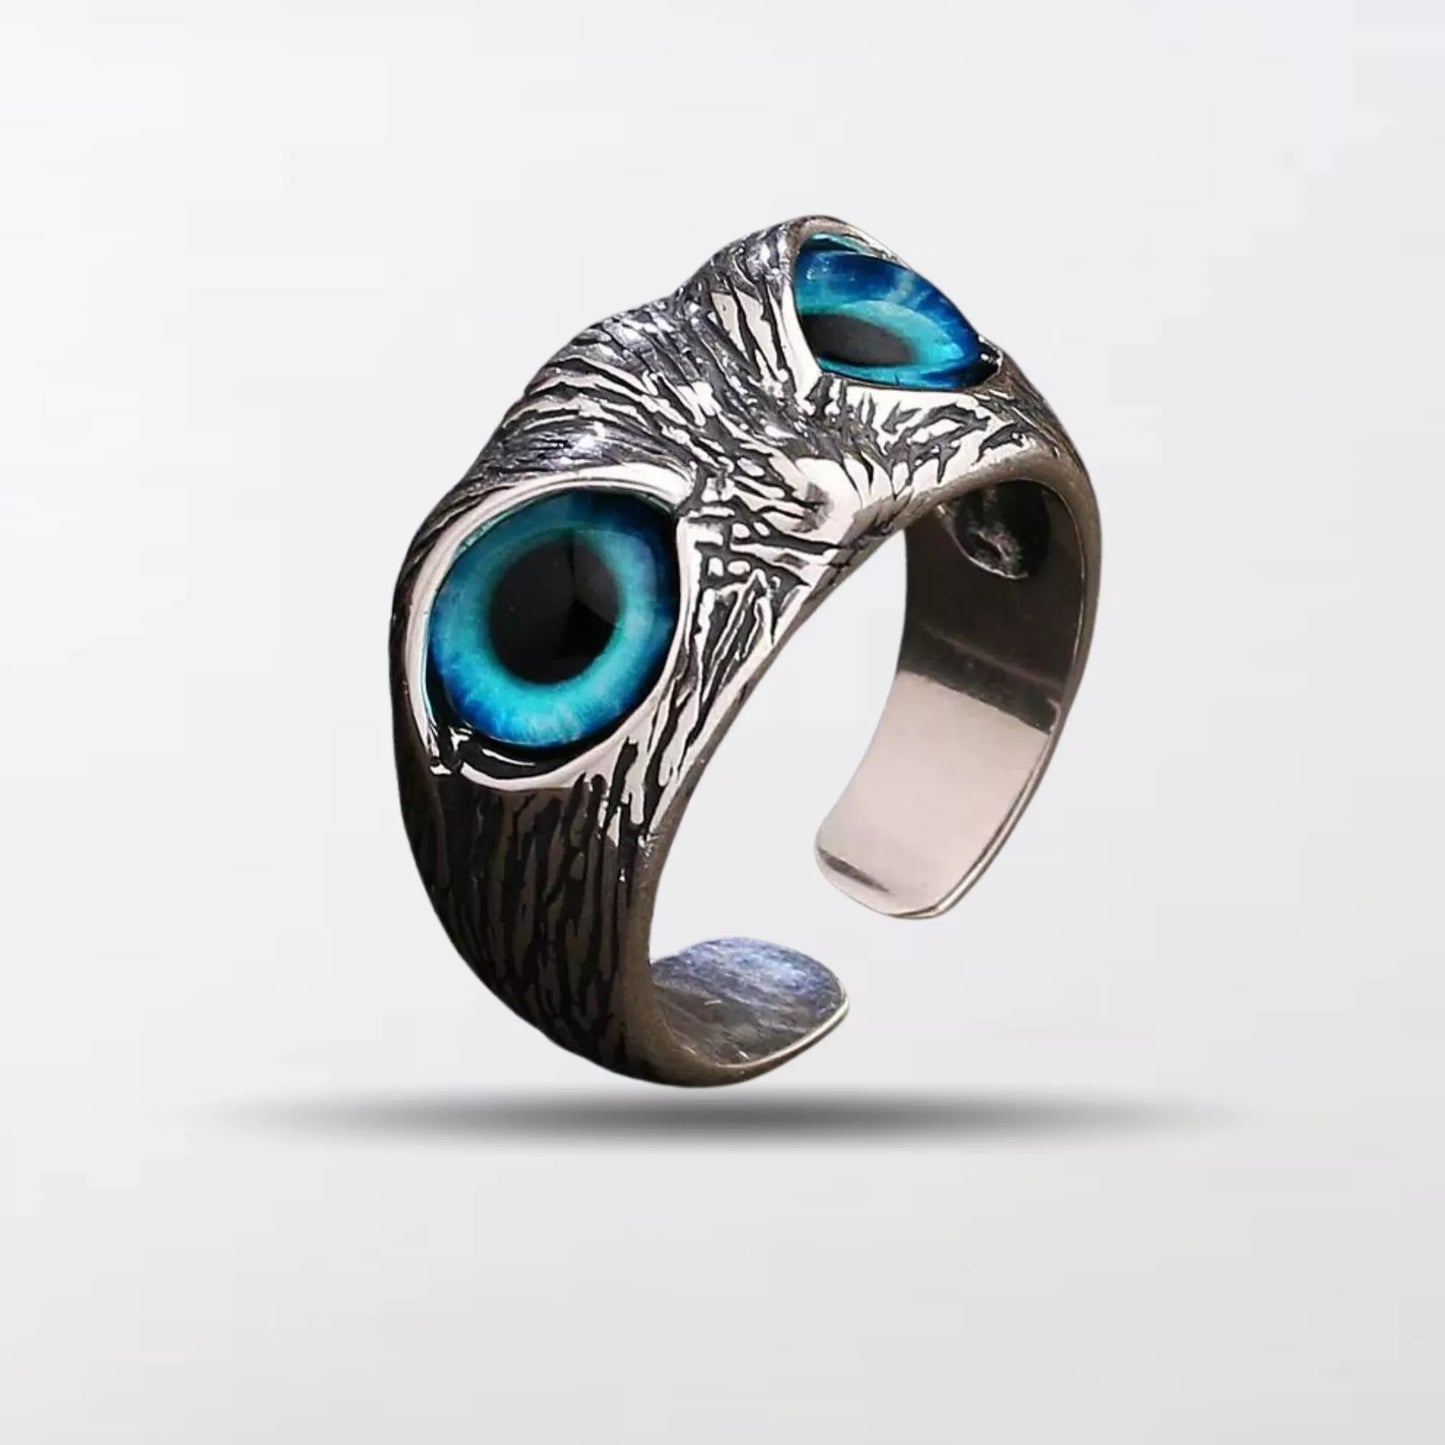 Silver Sterling Owl Ring By Clotechnow